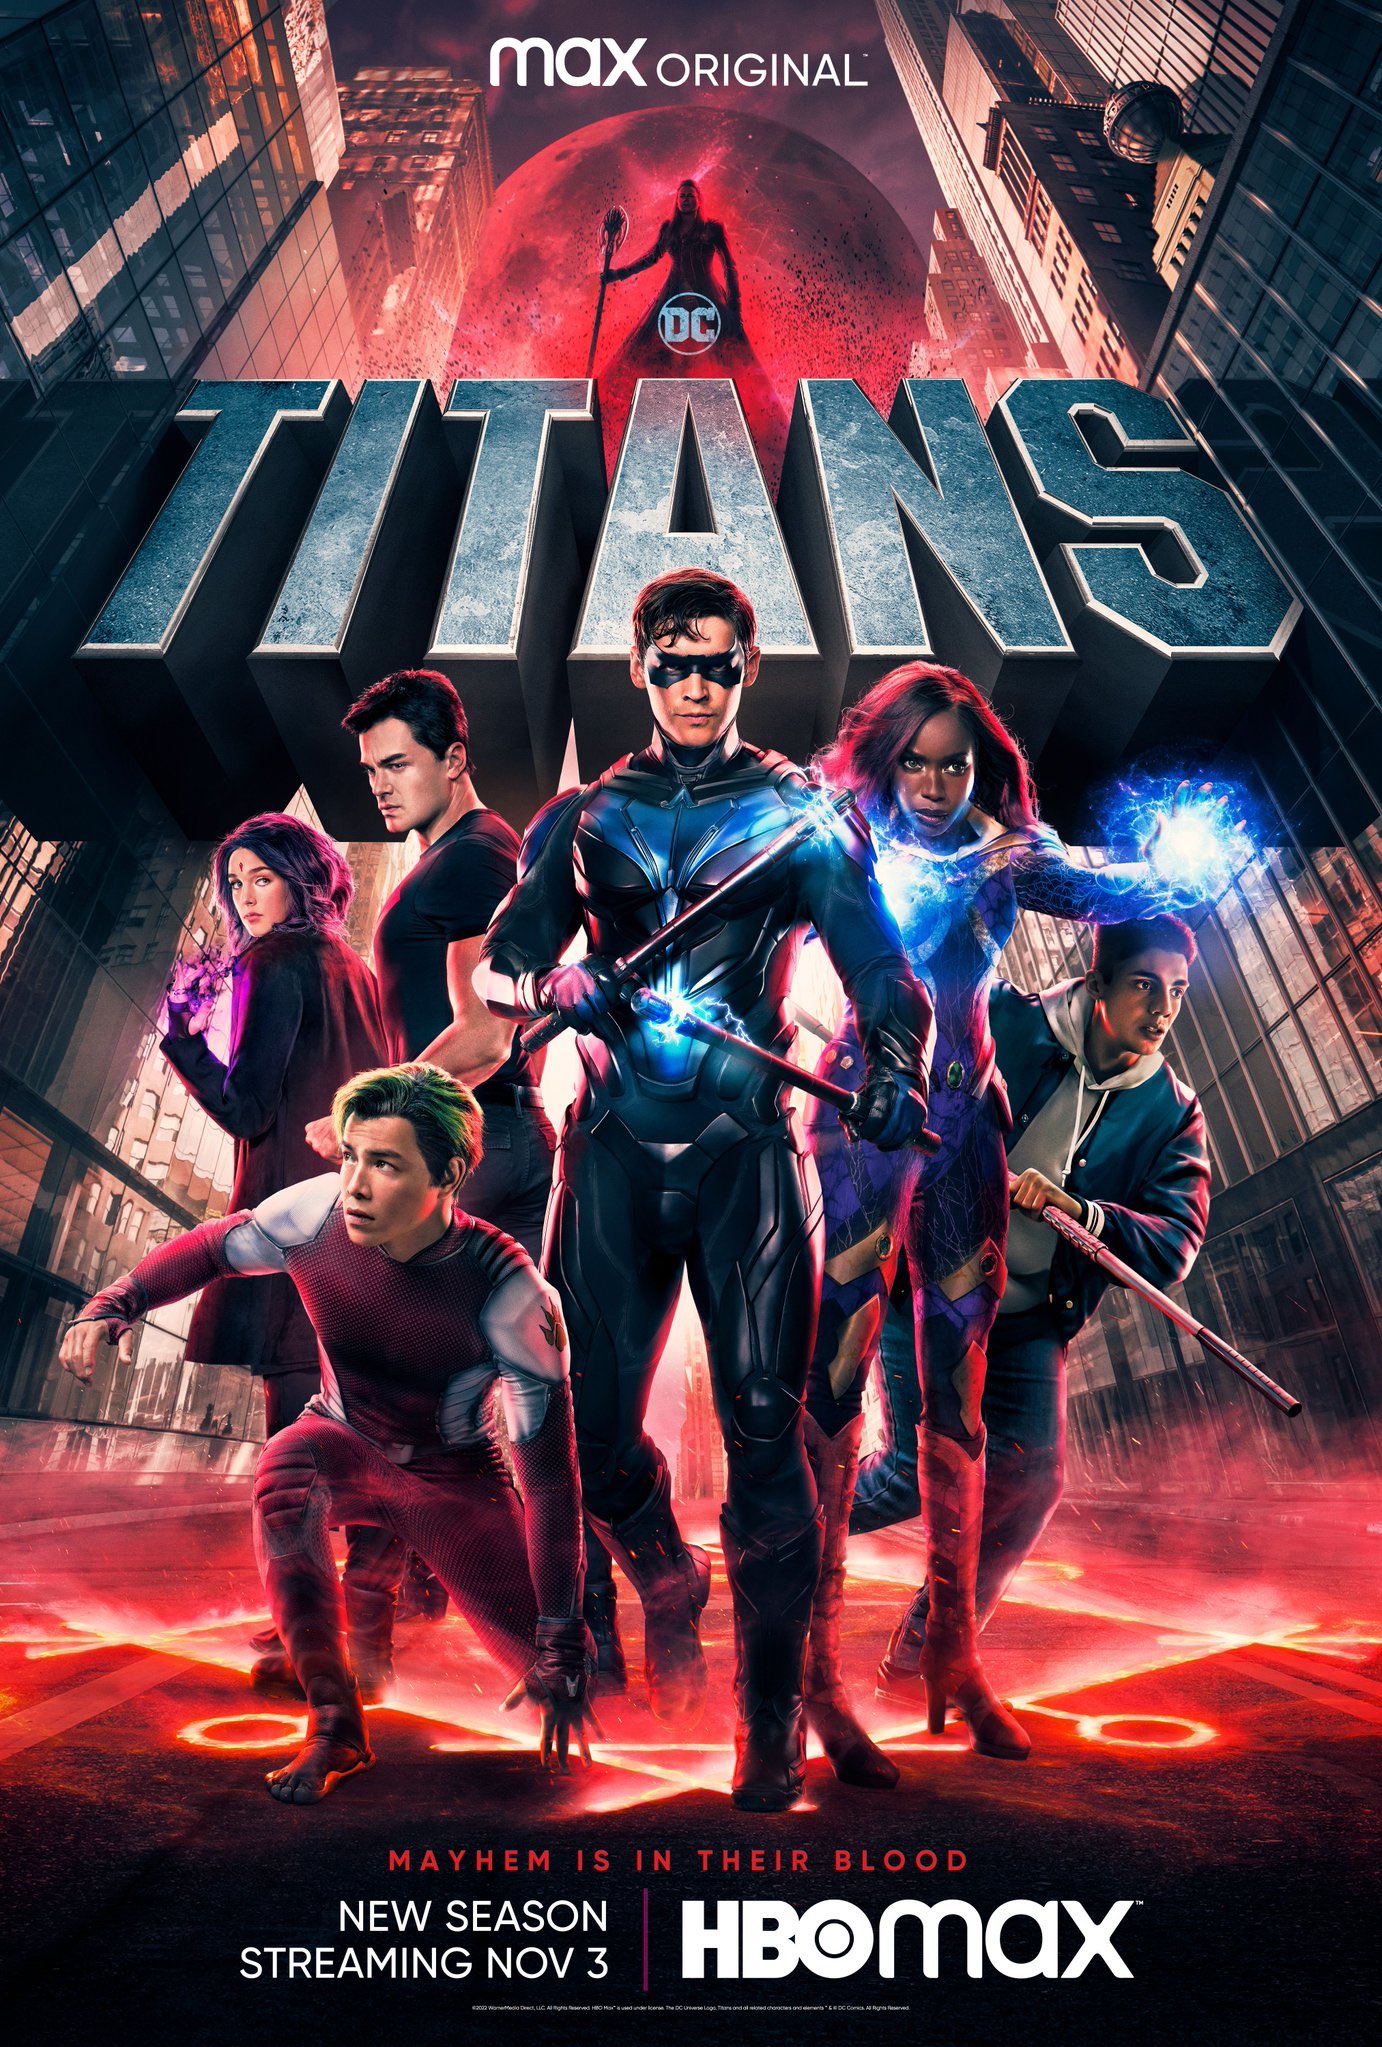 Titans season four poster featuring Raven, Beast Boy, Superboy, Nightwing, Starfire, and Tim Drake